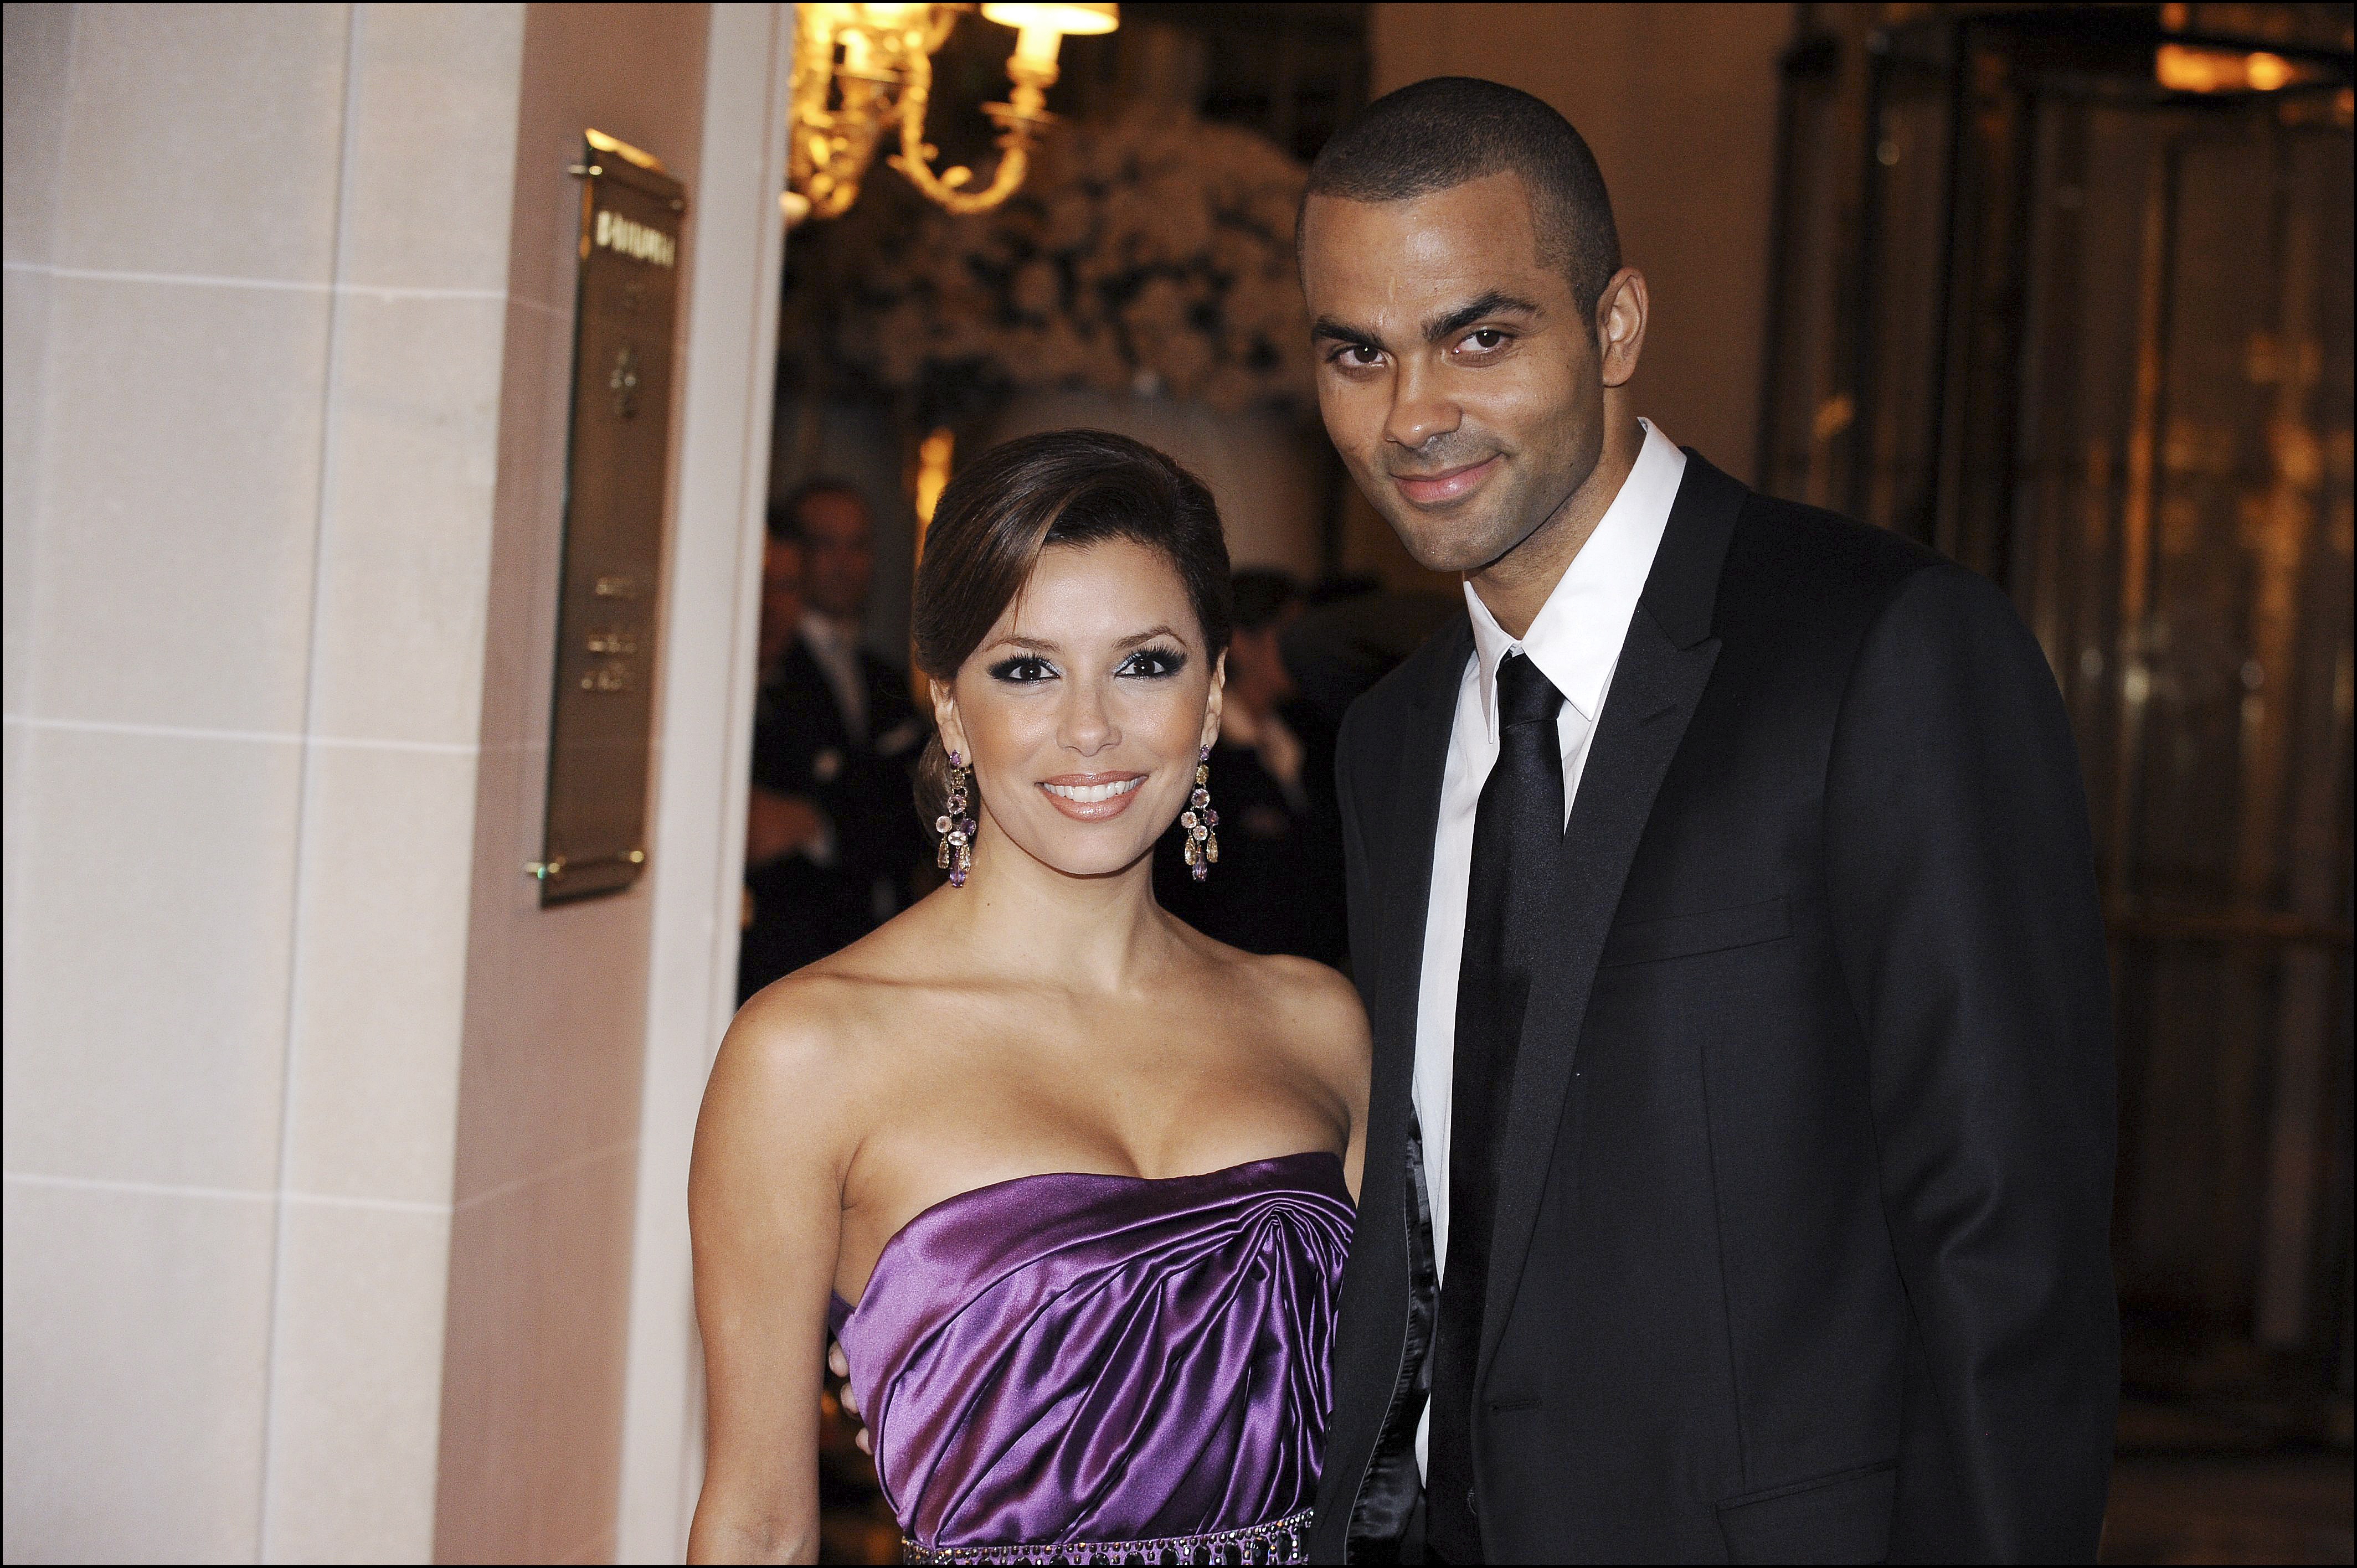 Eva Longoria and Tony Parker at the "Make a Wish" Charity Gala in Paris, France on September 21, 2009 | Source: Getty Images